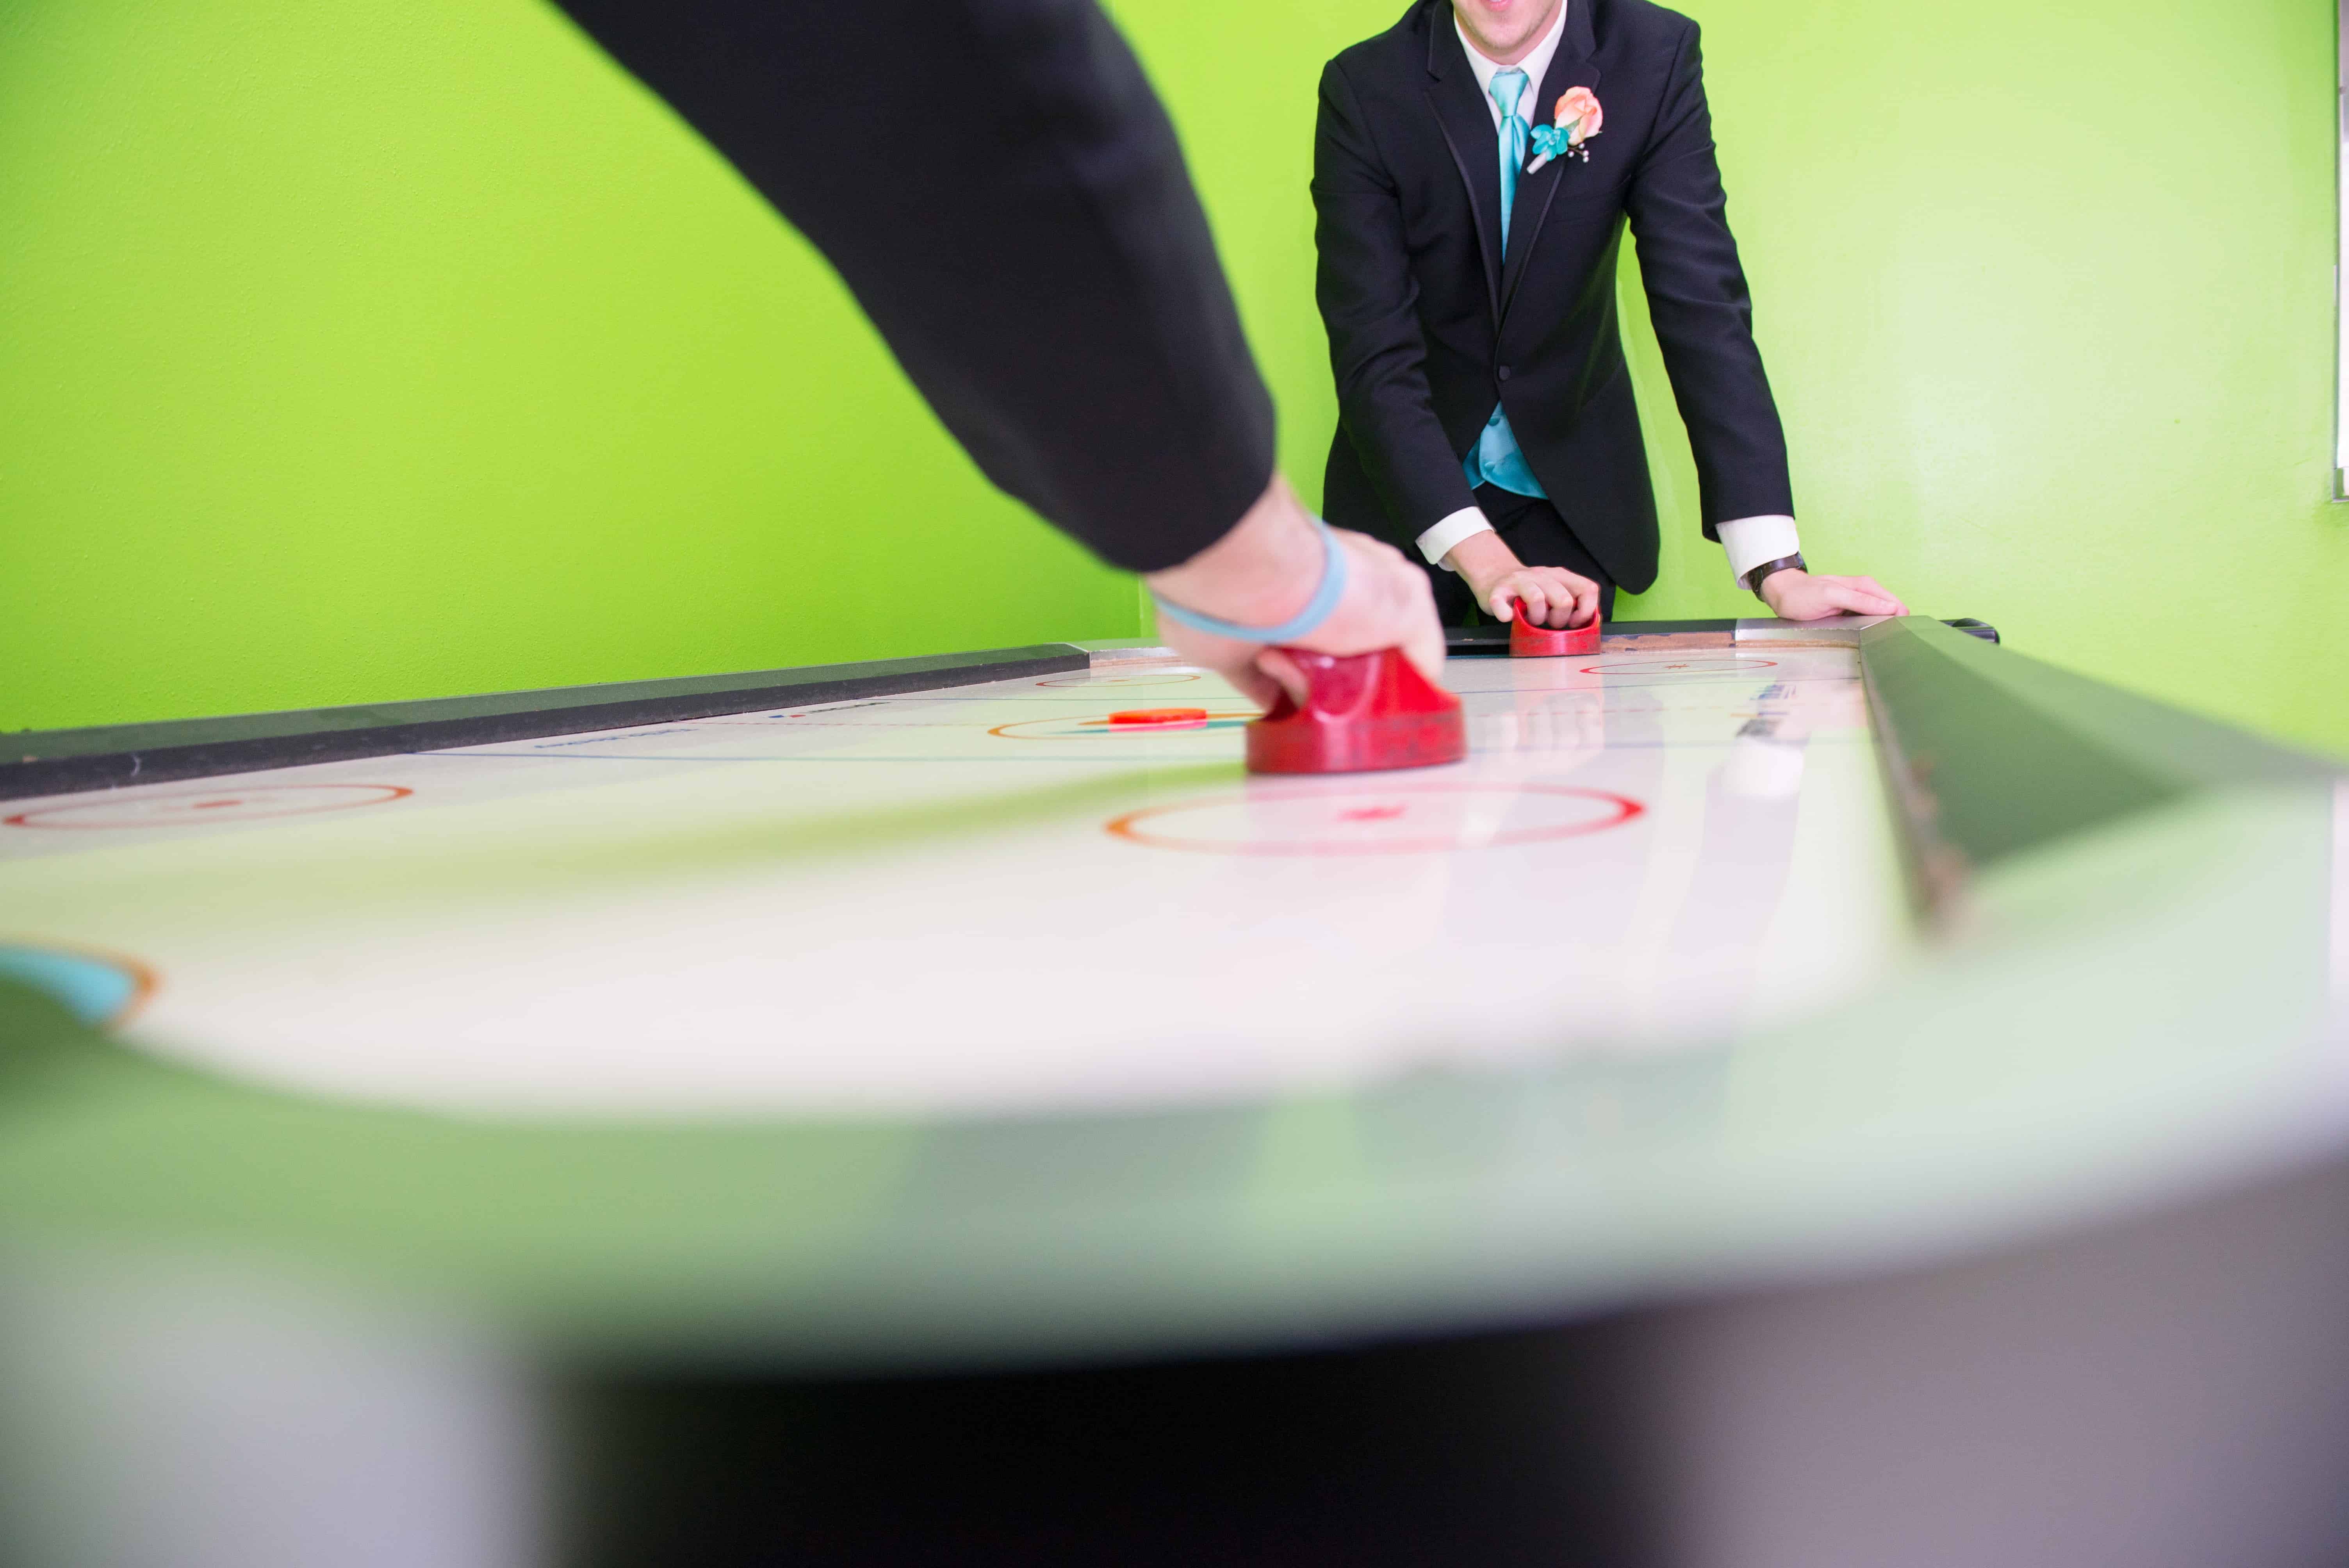 two people playing air hockey